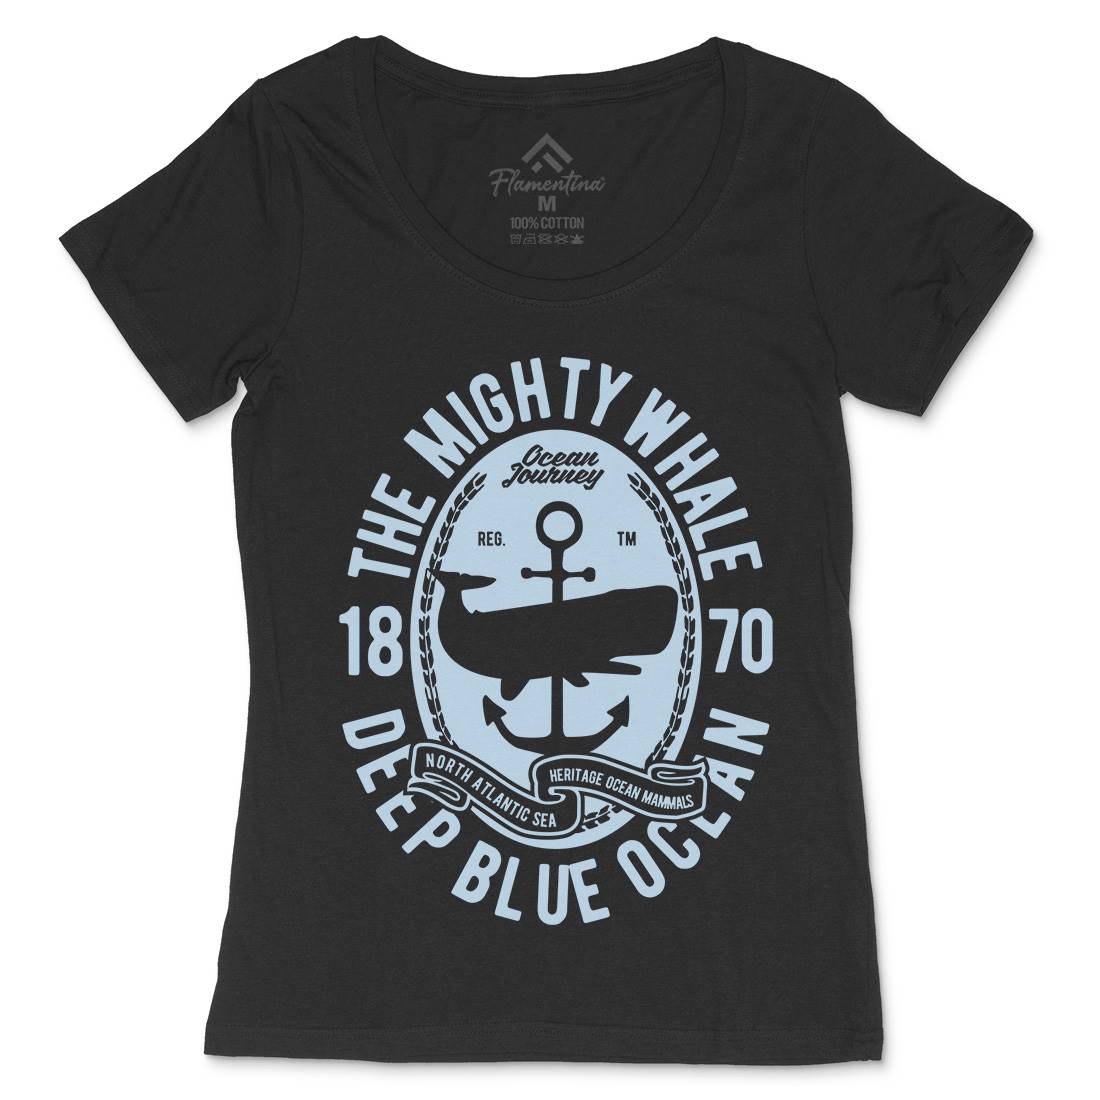 The Mighty Whale Womens Scoop Neck T-Shirt Navy B466